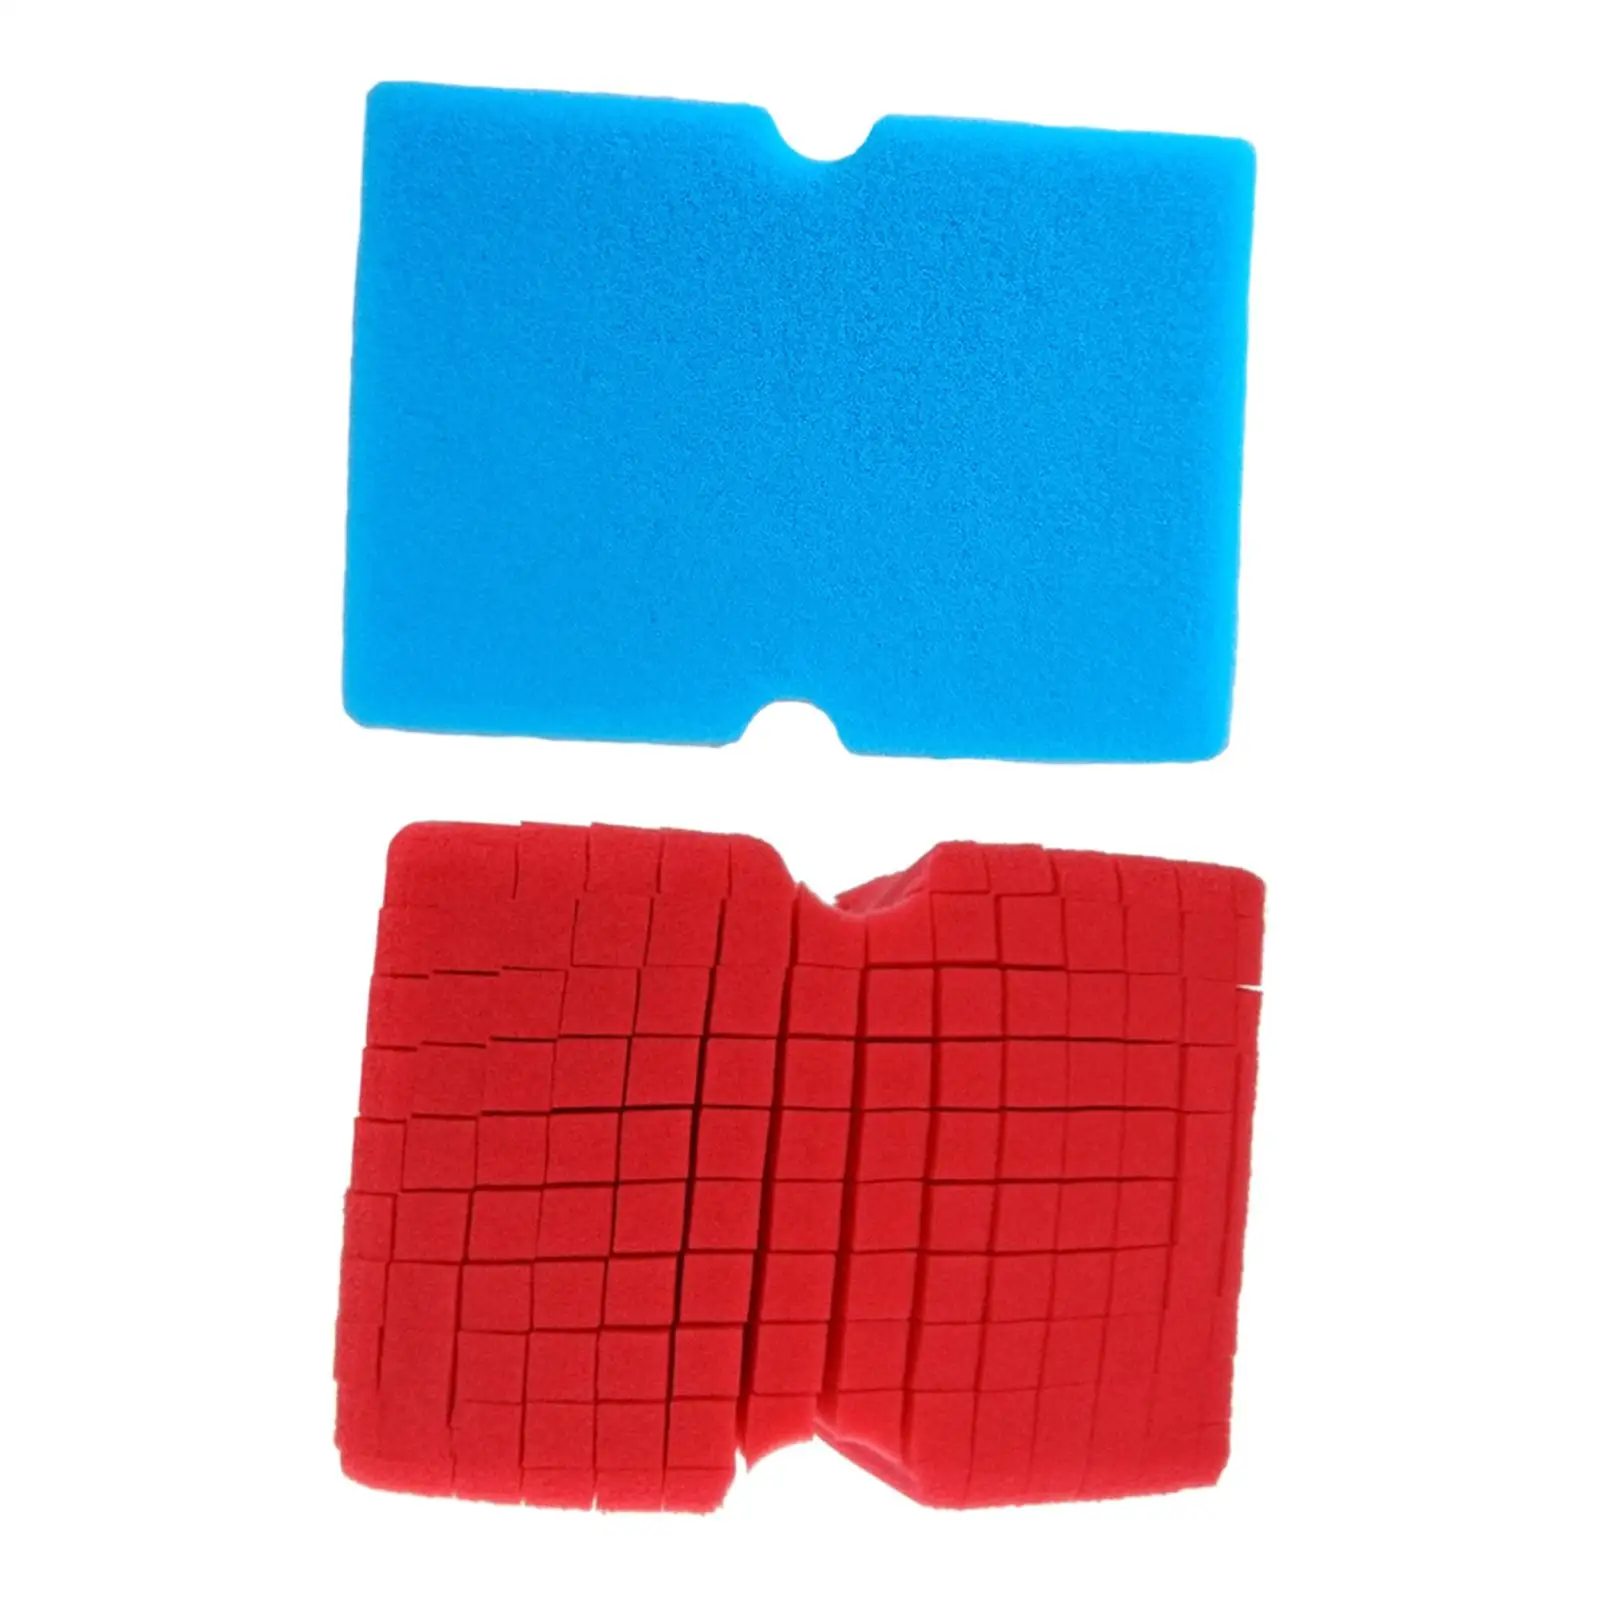 Damp Clean Duster Sponge Durable Non Scratch Functional Thick Household Cleaning Sponge for Boats Motorcycles and Furniture